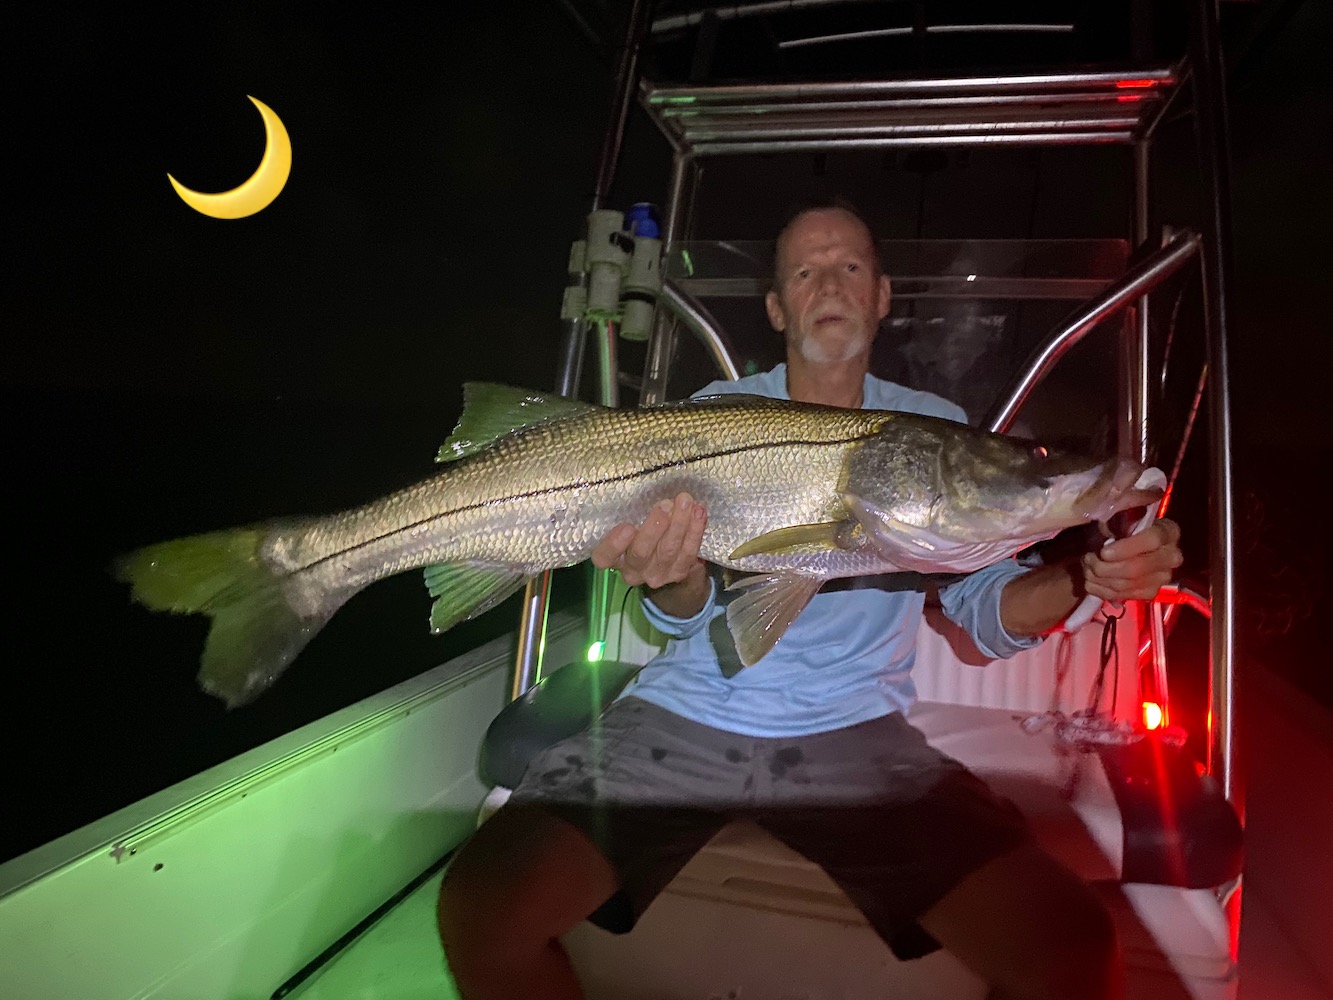 catching snook at night near cape coral